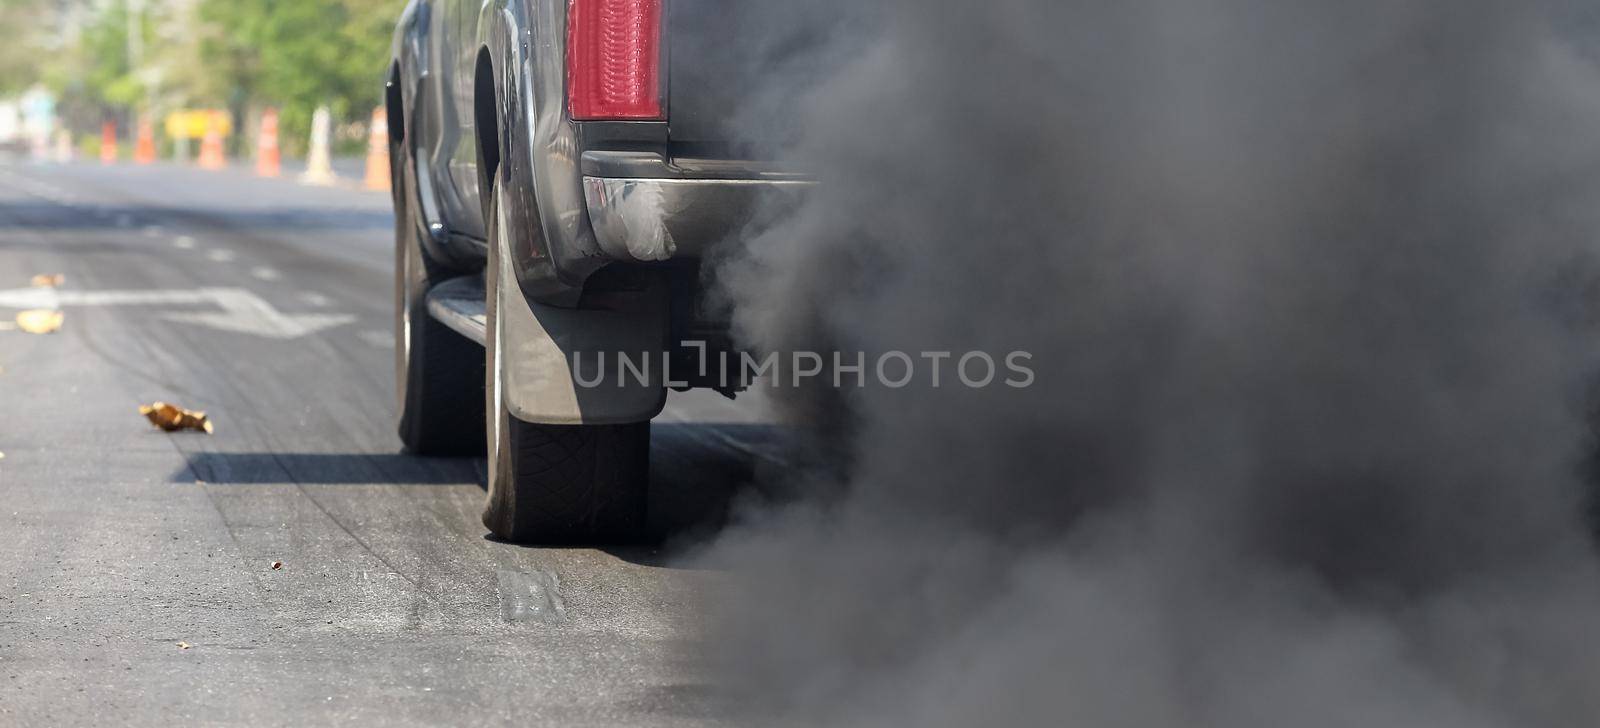 Air pollution from vehicle exhaust pipe on road. by toa55